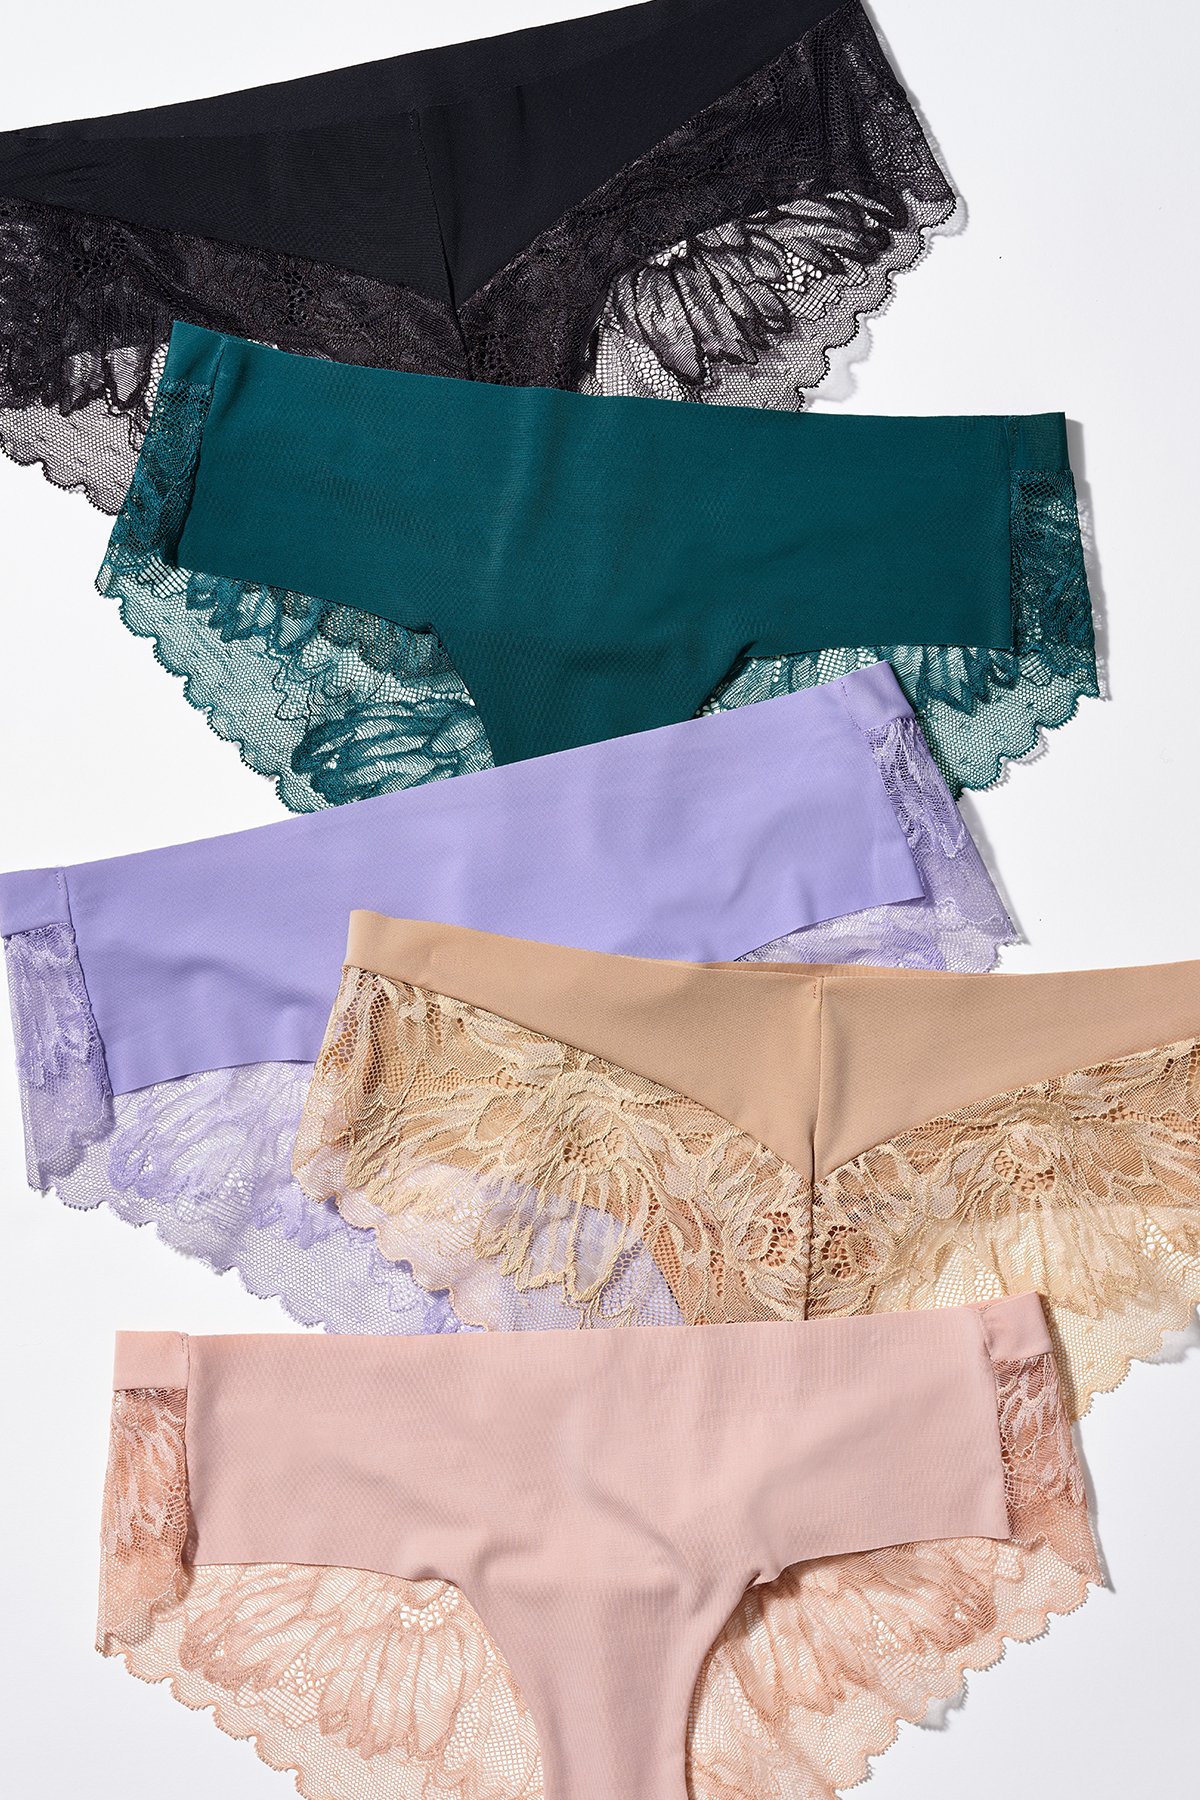 Soma - All Panties on Sale — Delray Marketplace